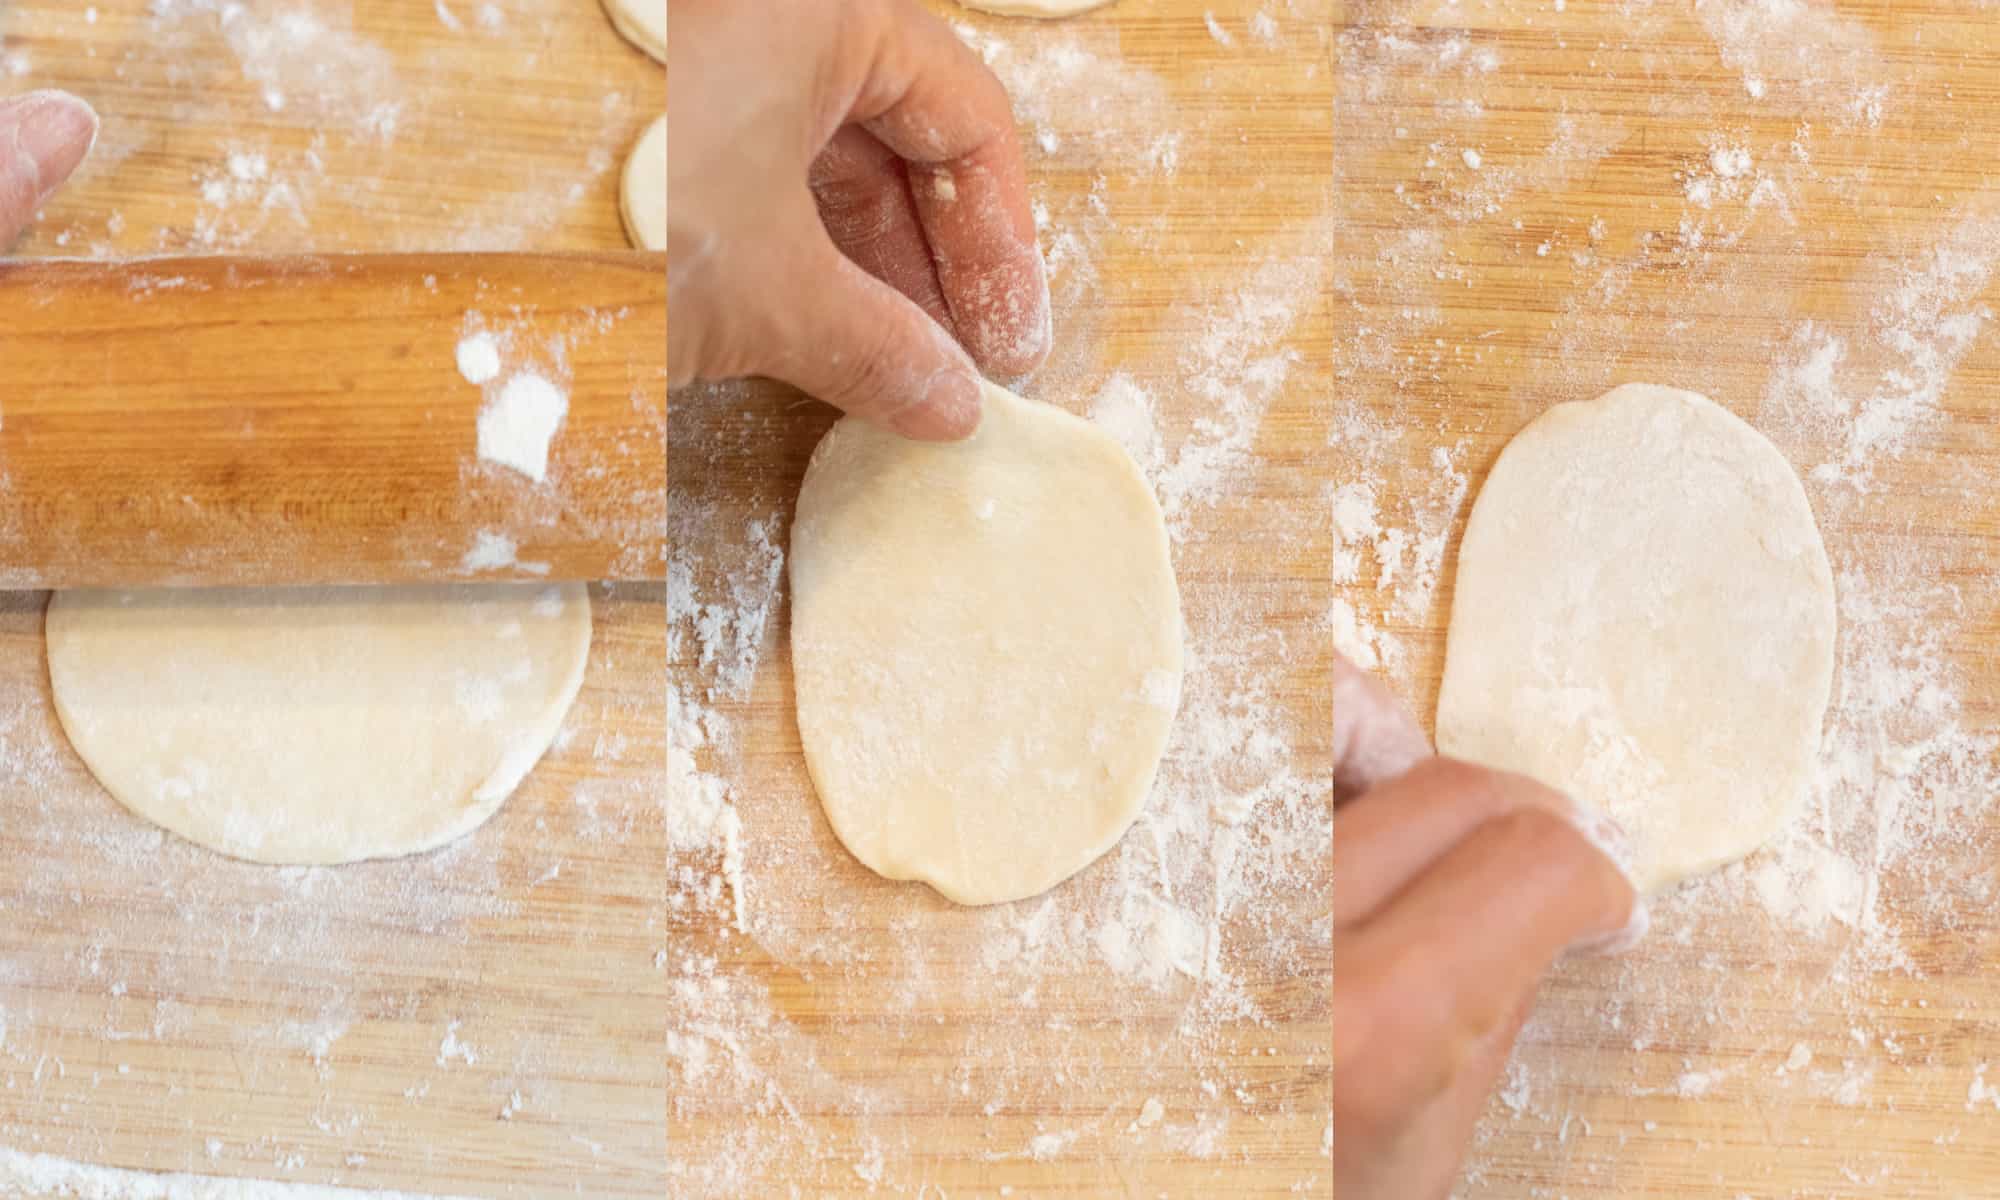 3 pictures, a rolling pin rolling out dough, a hand on one side of the dough oval on a floured cutting board, and then the hand on the other side of the dough oval.